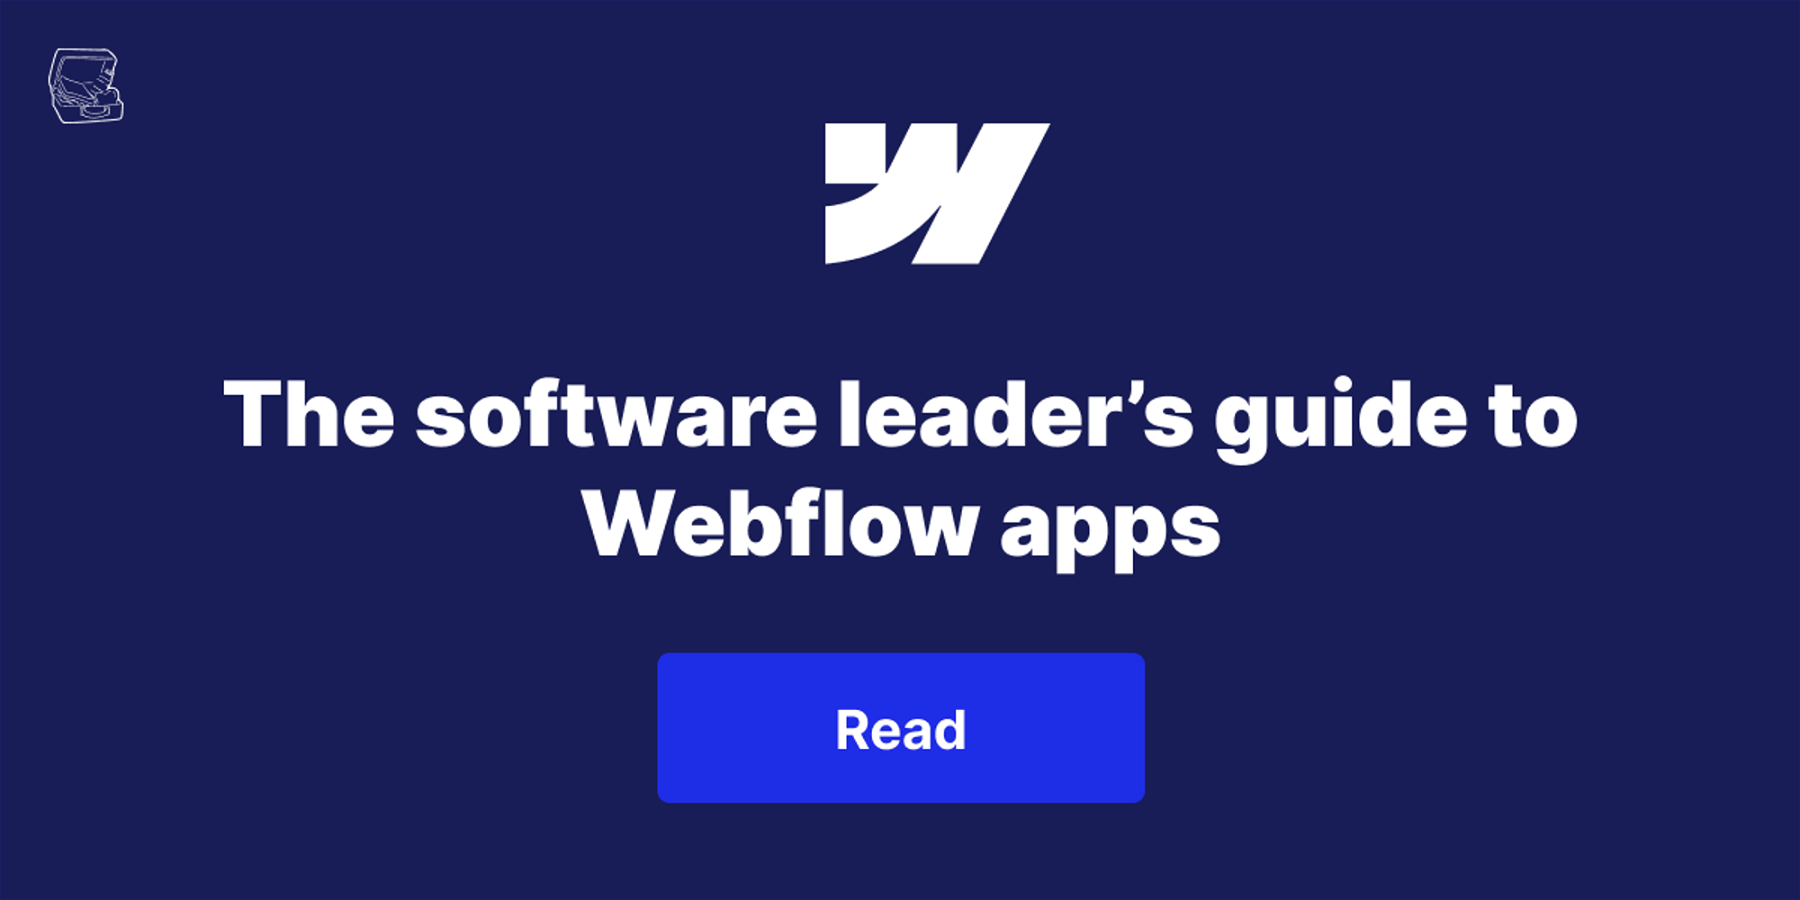 The software leader’s guide to Webflow apps